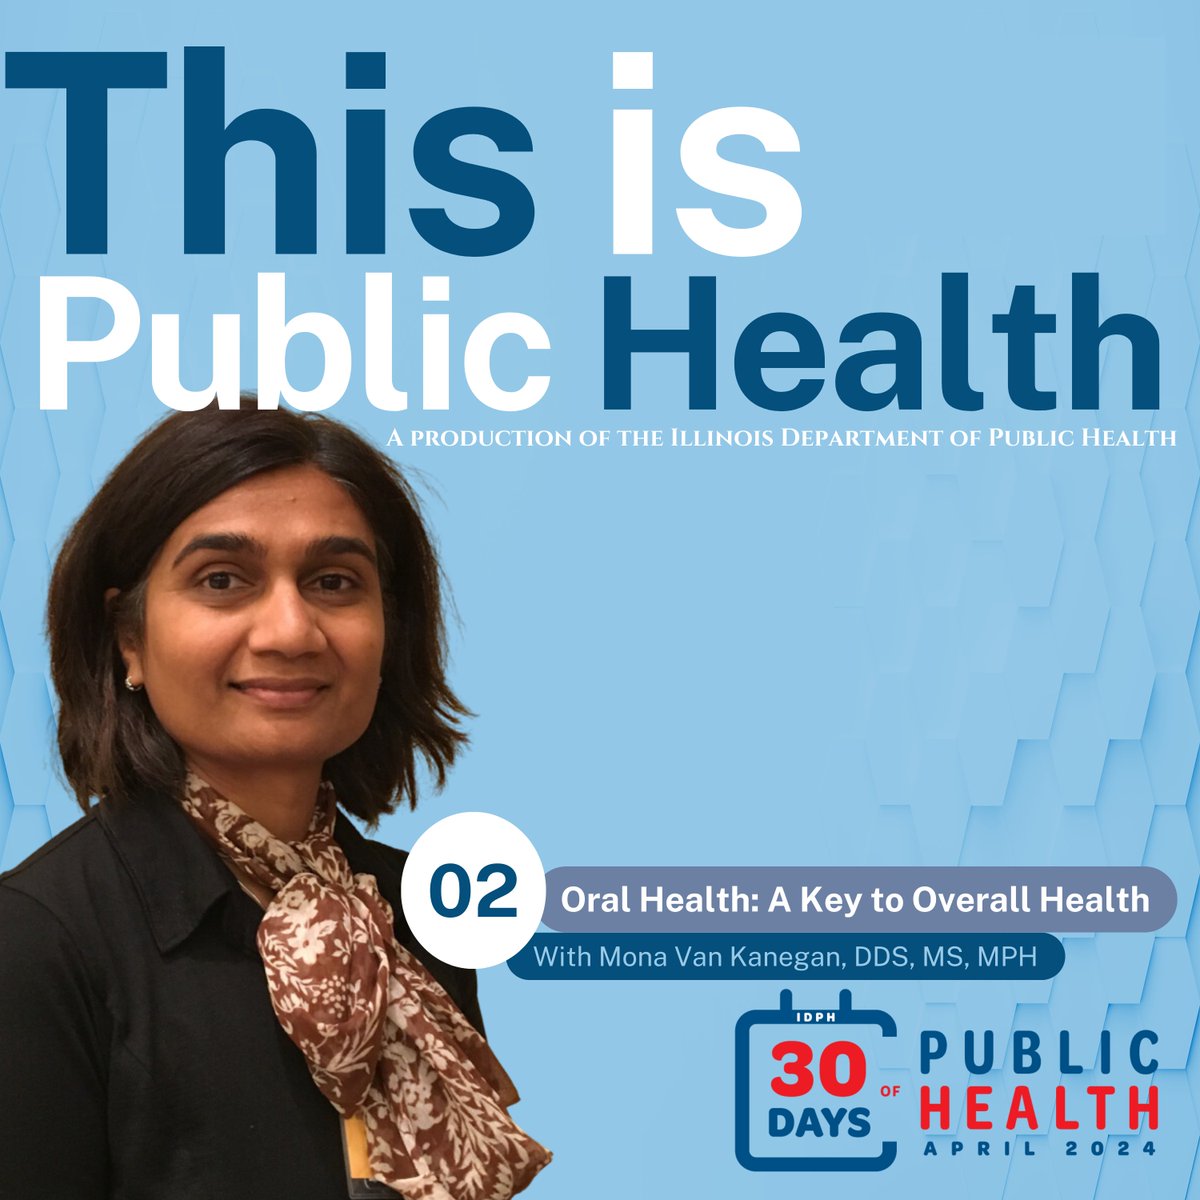 'This is Public Health' is back this week with another episode! 🎙️ Hear from Mona Van Kanegan, Chief of our Oral Health Section on the relationship between oral health and overall health. 🦷 Listen on YouTube or Spotify: 🎧 open.spotify.com/episode/2tBf9f… 📽️ youtu.be/ZFKskUKuR8Q?si…